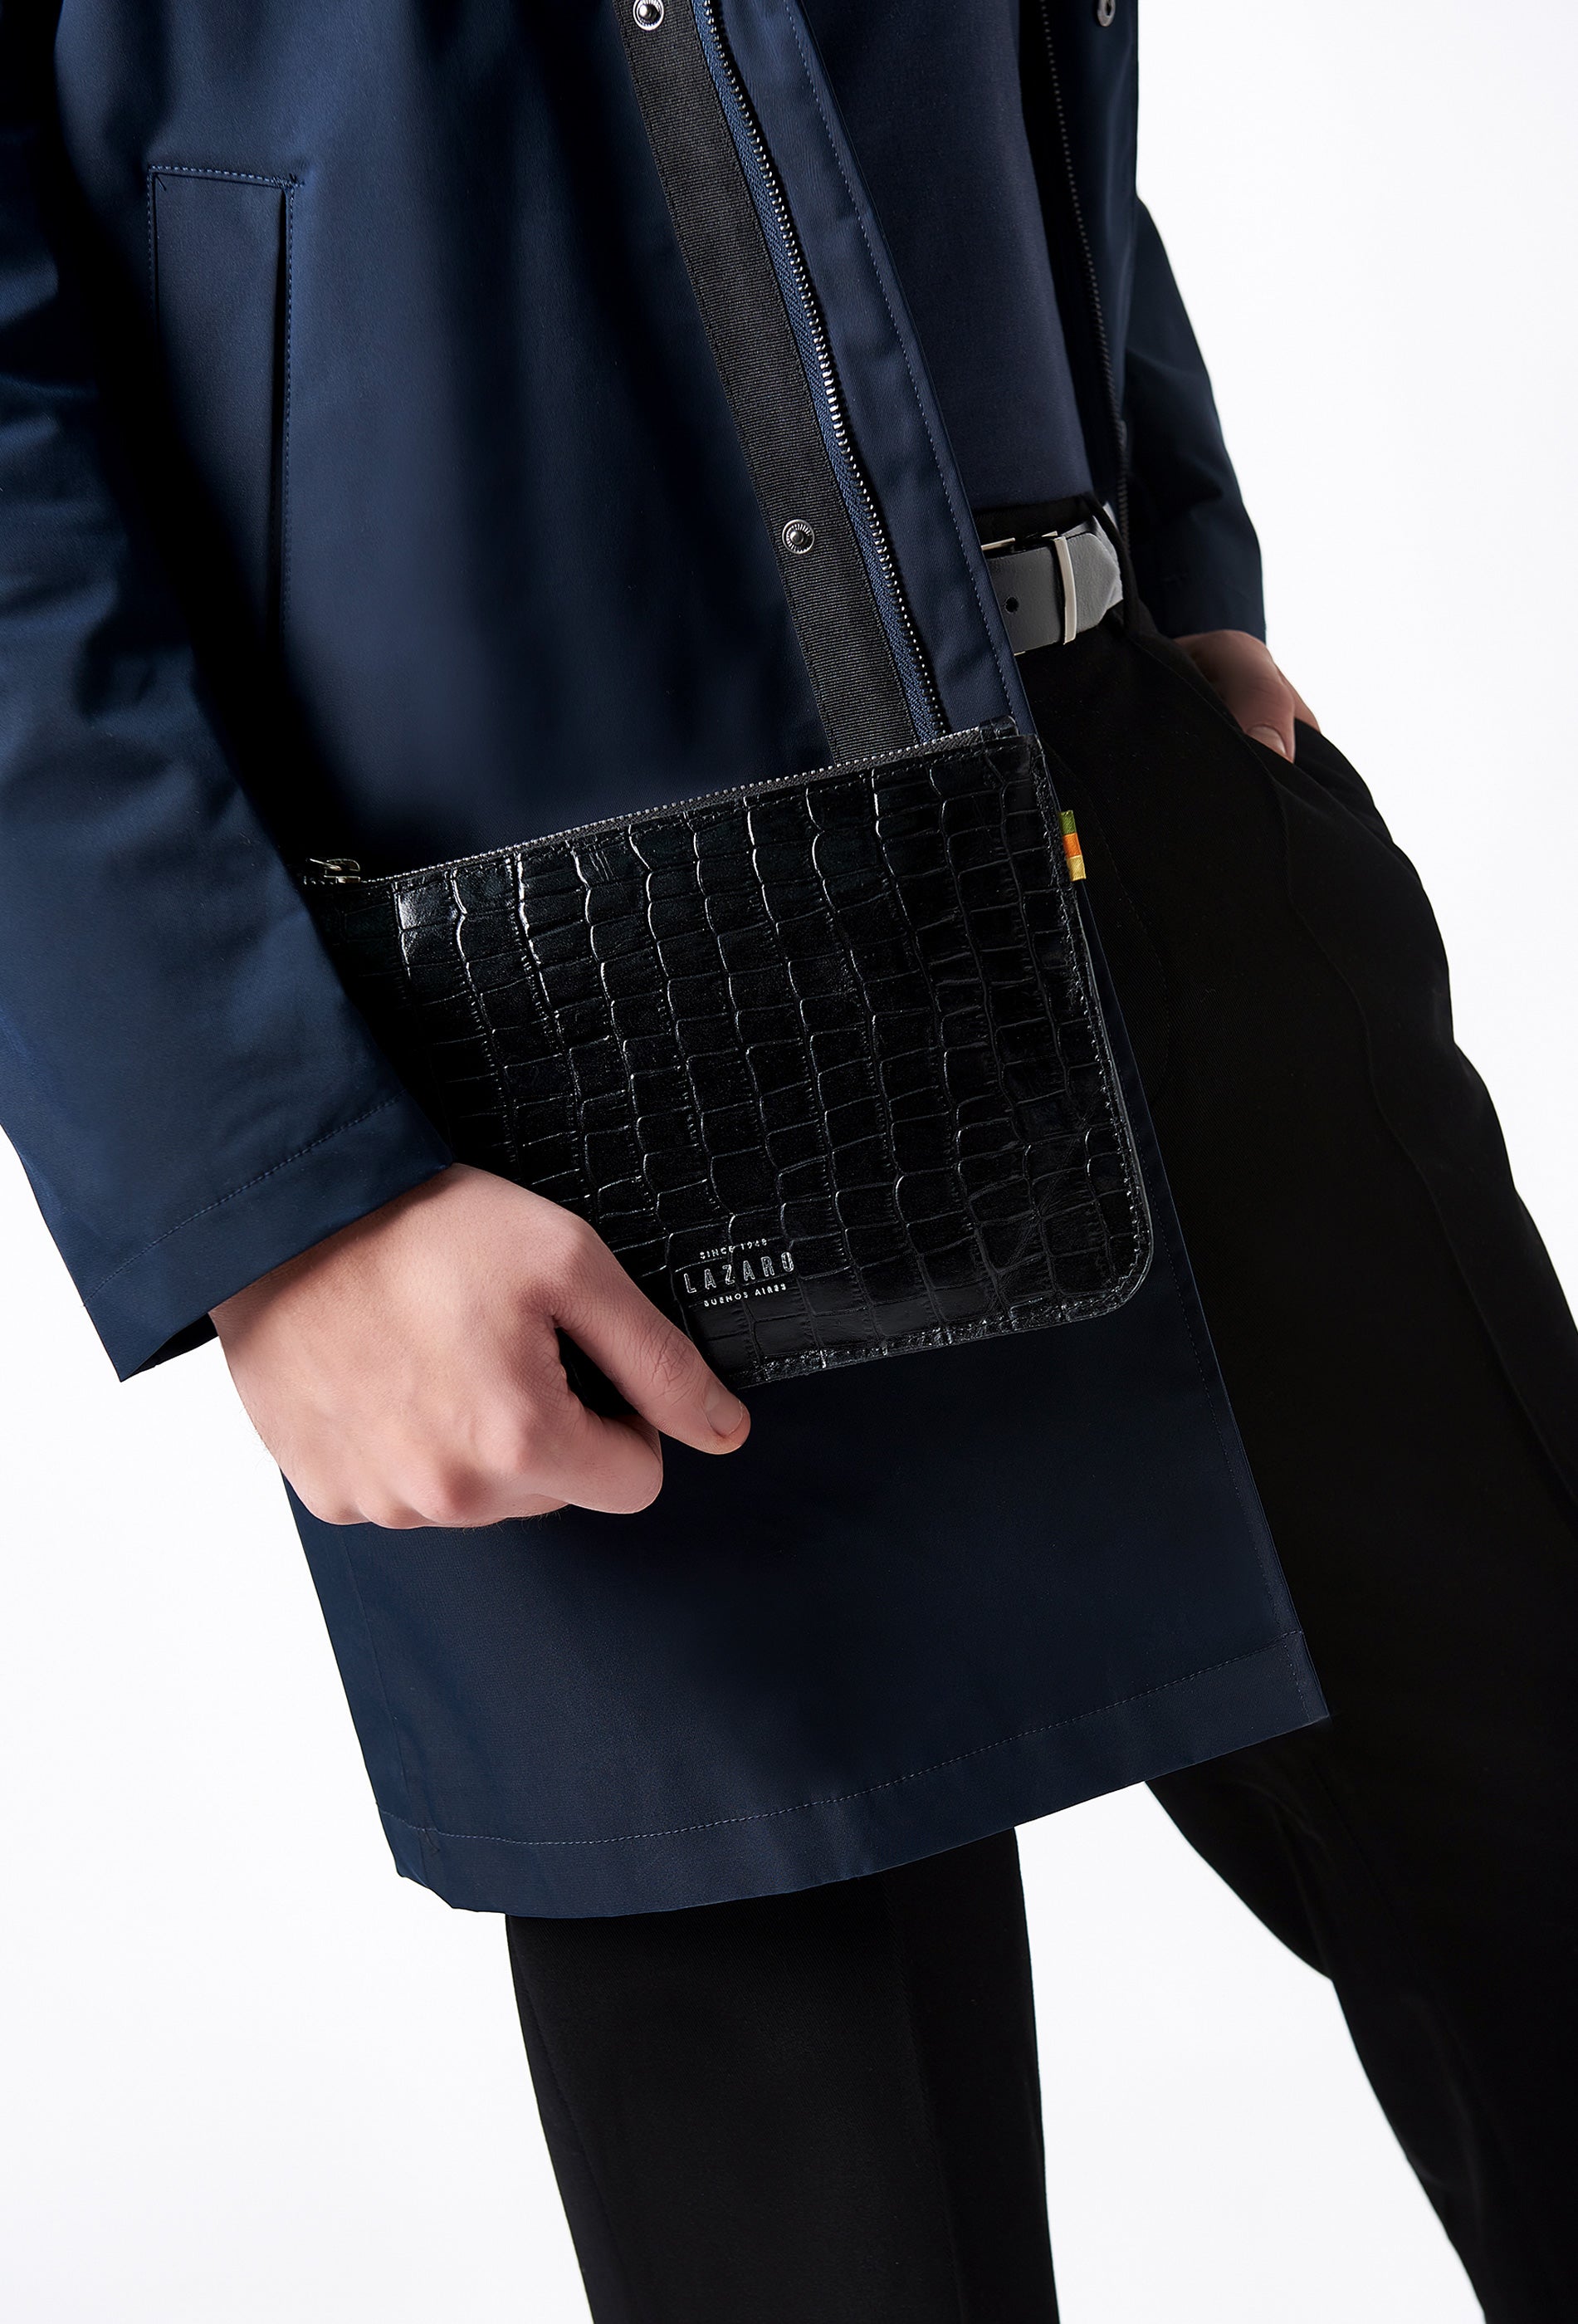 A model carries a sophisticated black croco leather zipper pouch, showcasing its sophisticated design. The model confidently displays the bag's size and craftsmanship while exuding a sense of style and elegance.